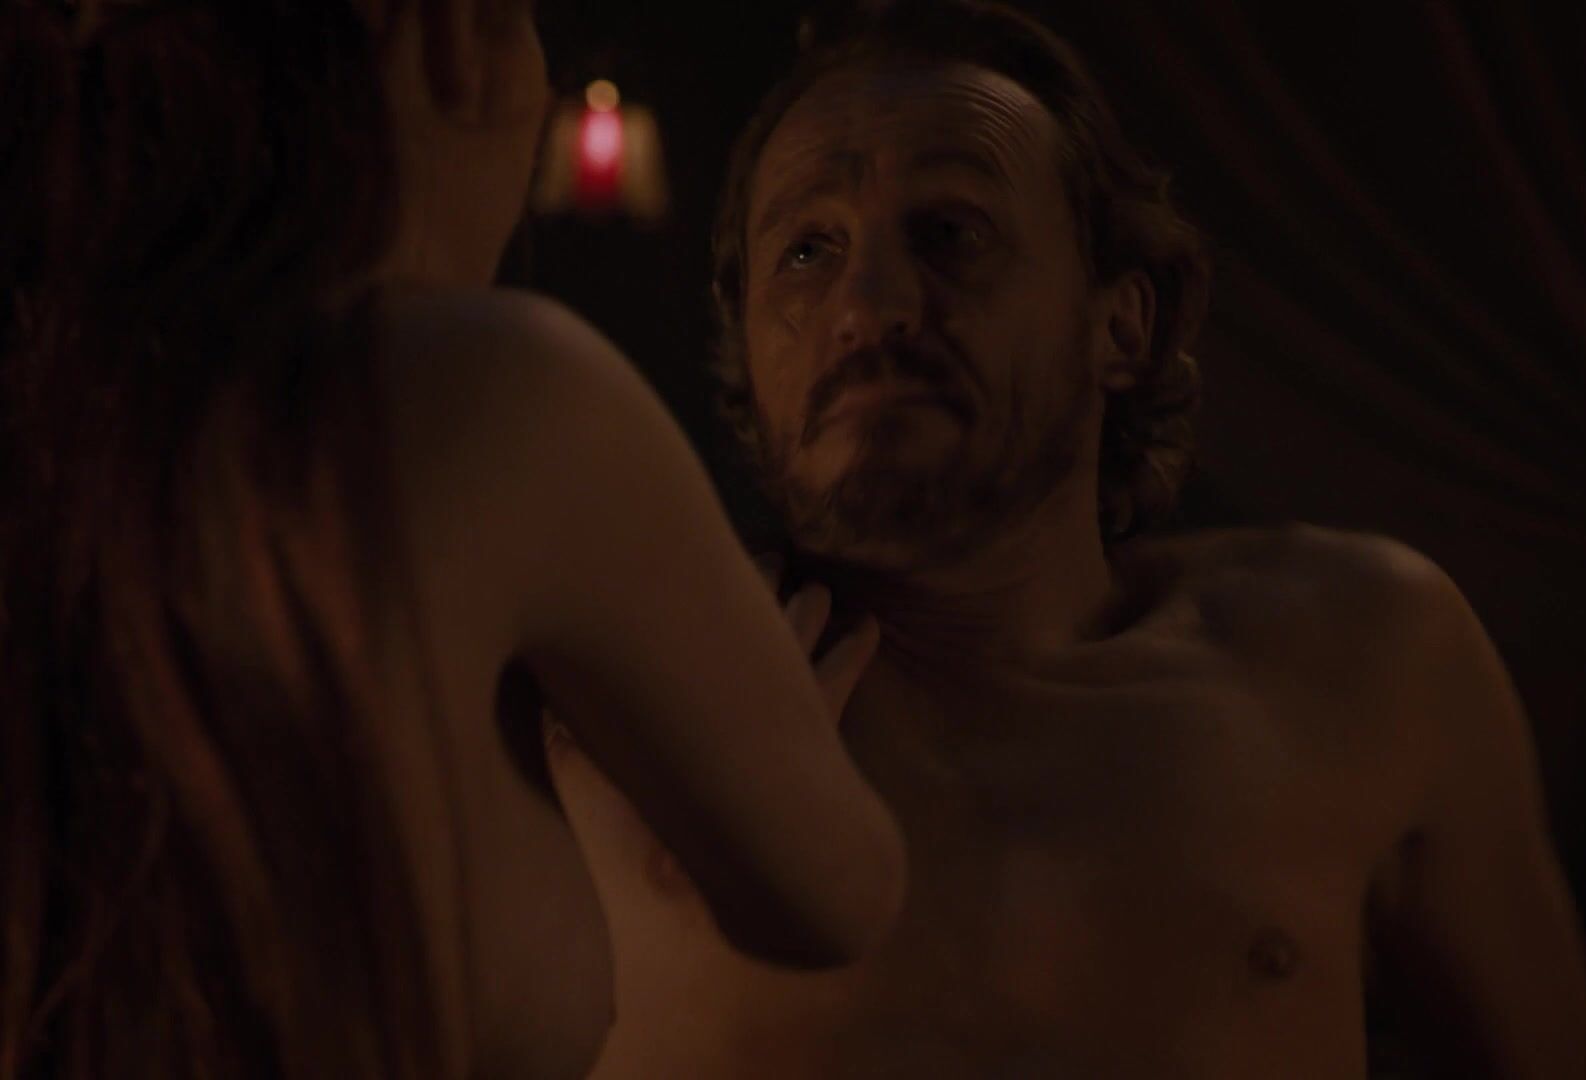 Colombia Marina Lawrence-Mahrra goes nude in Game of Thrones s08e01 (2019) Pica - 1